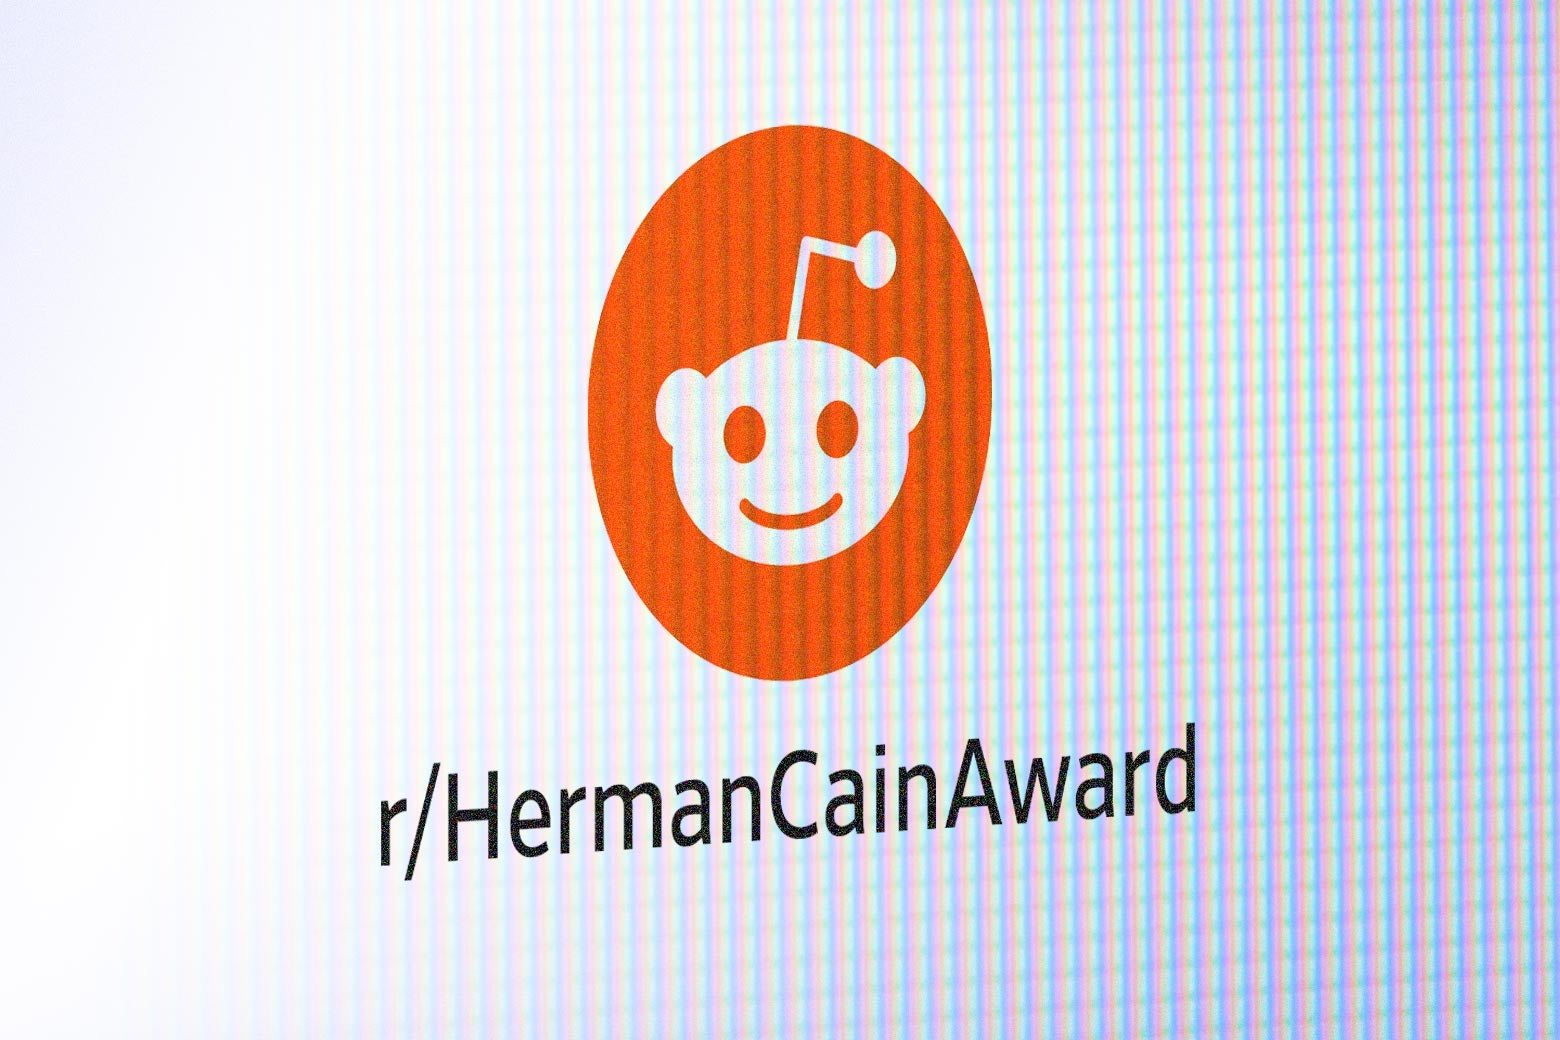 A screen depicts the Reddit logo above a line of text reading "r/HermanCainAward."